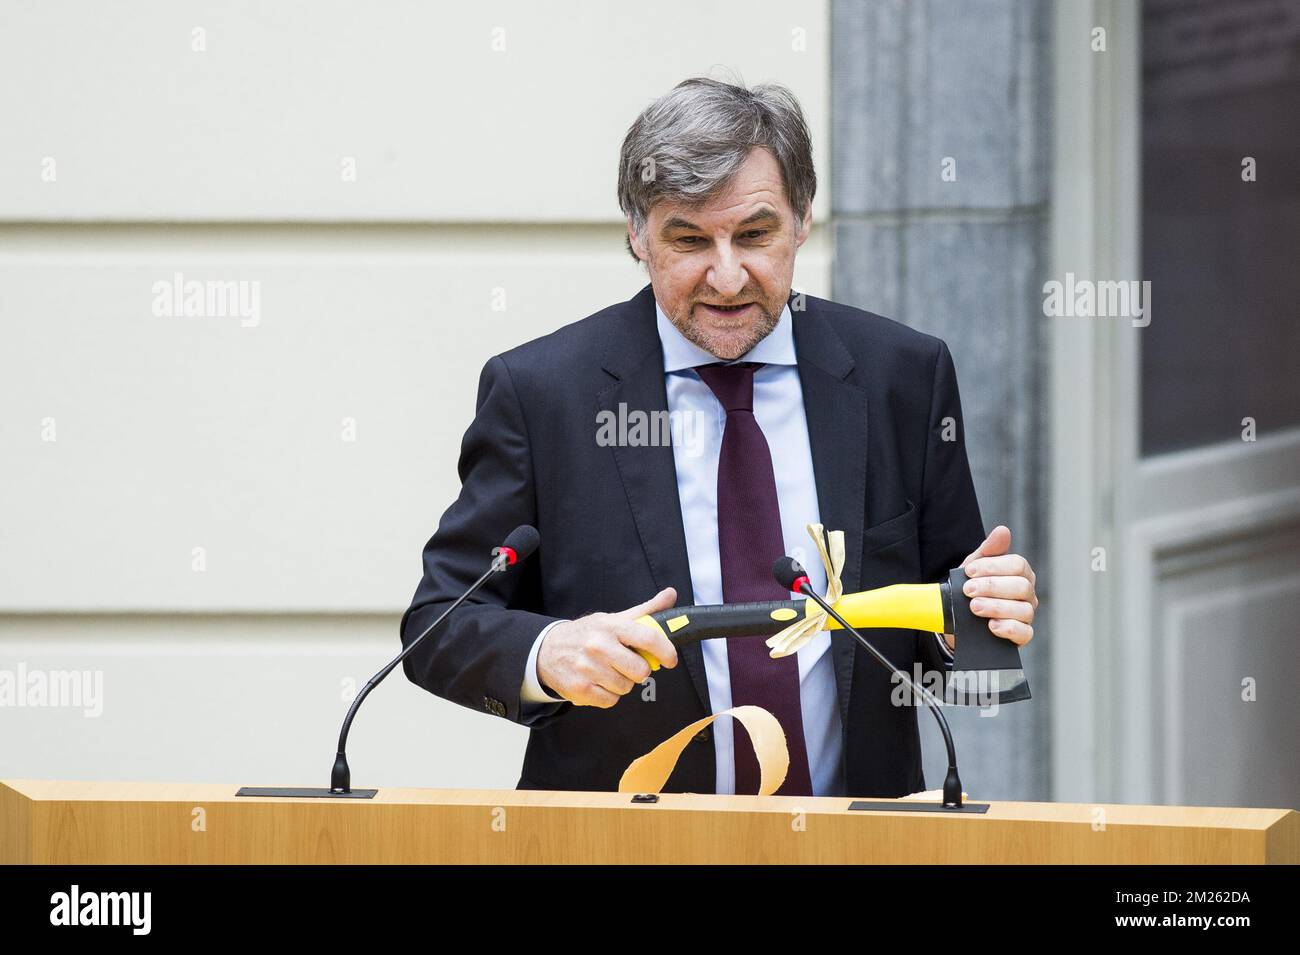 NV-A's Wilfried Vandaele pictured with an axe during a plenary session of the Flemish Parliament in Brussels, Wednesday 22 March 2017. BELGA PHOTO JASPER JACOBS Stock Photo